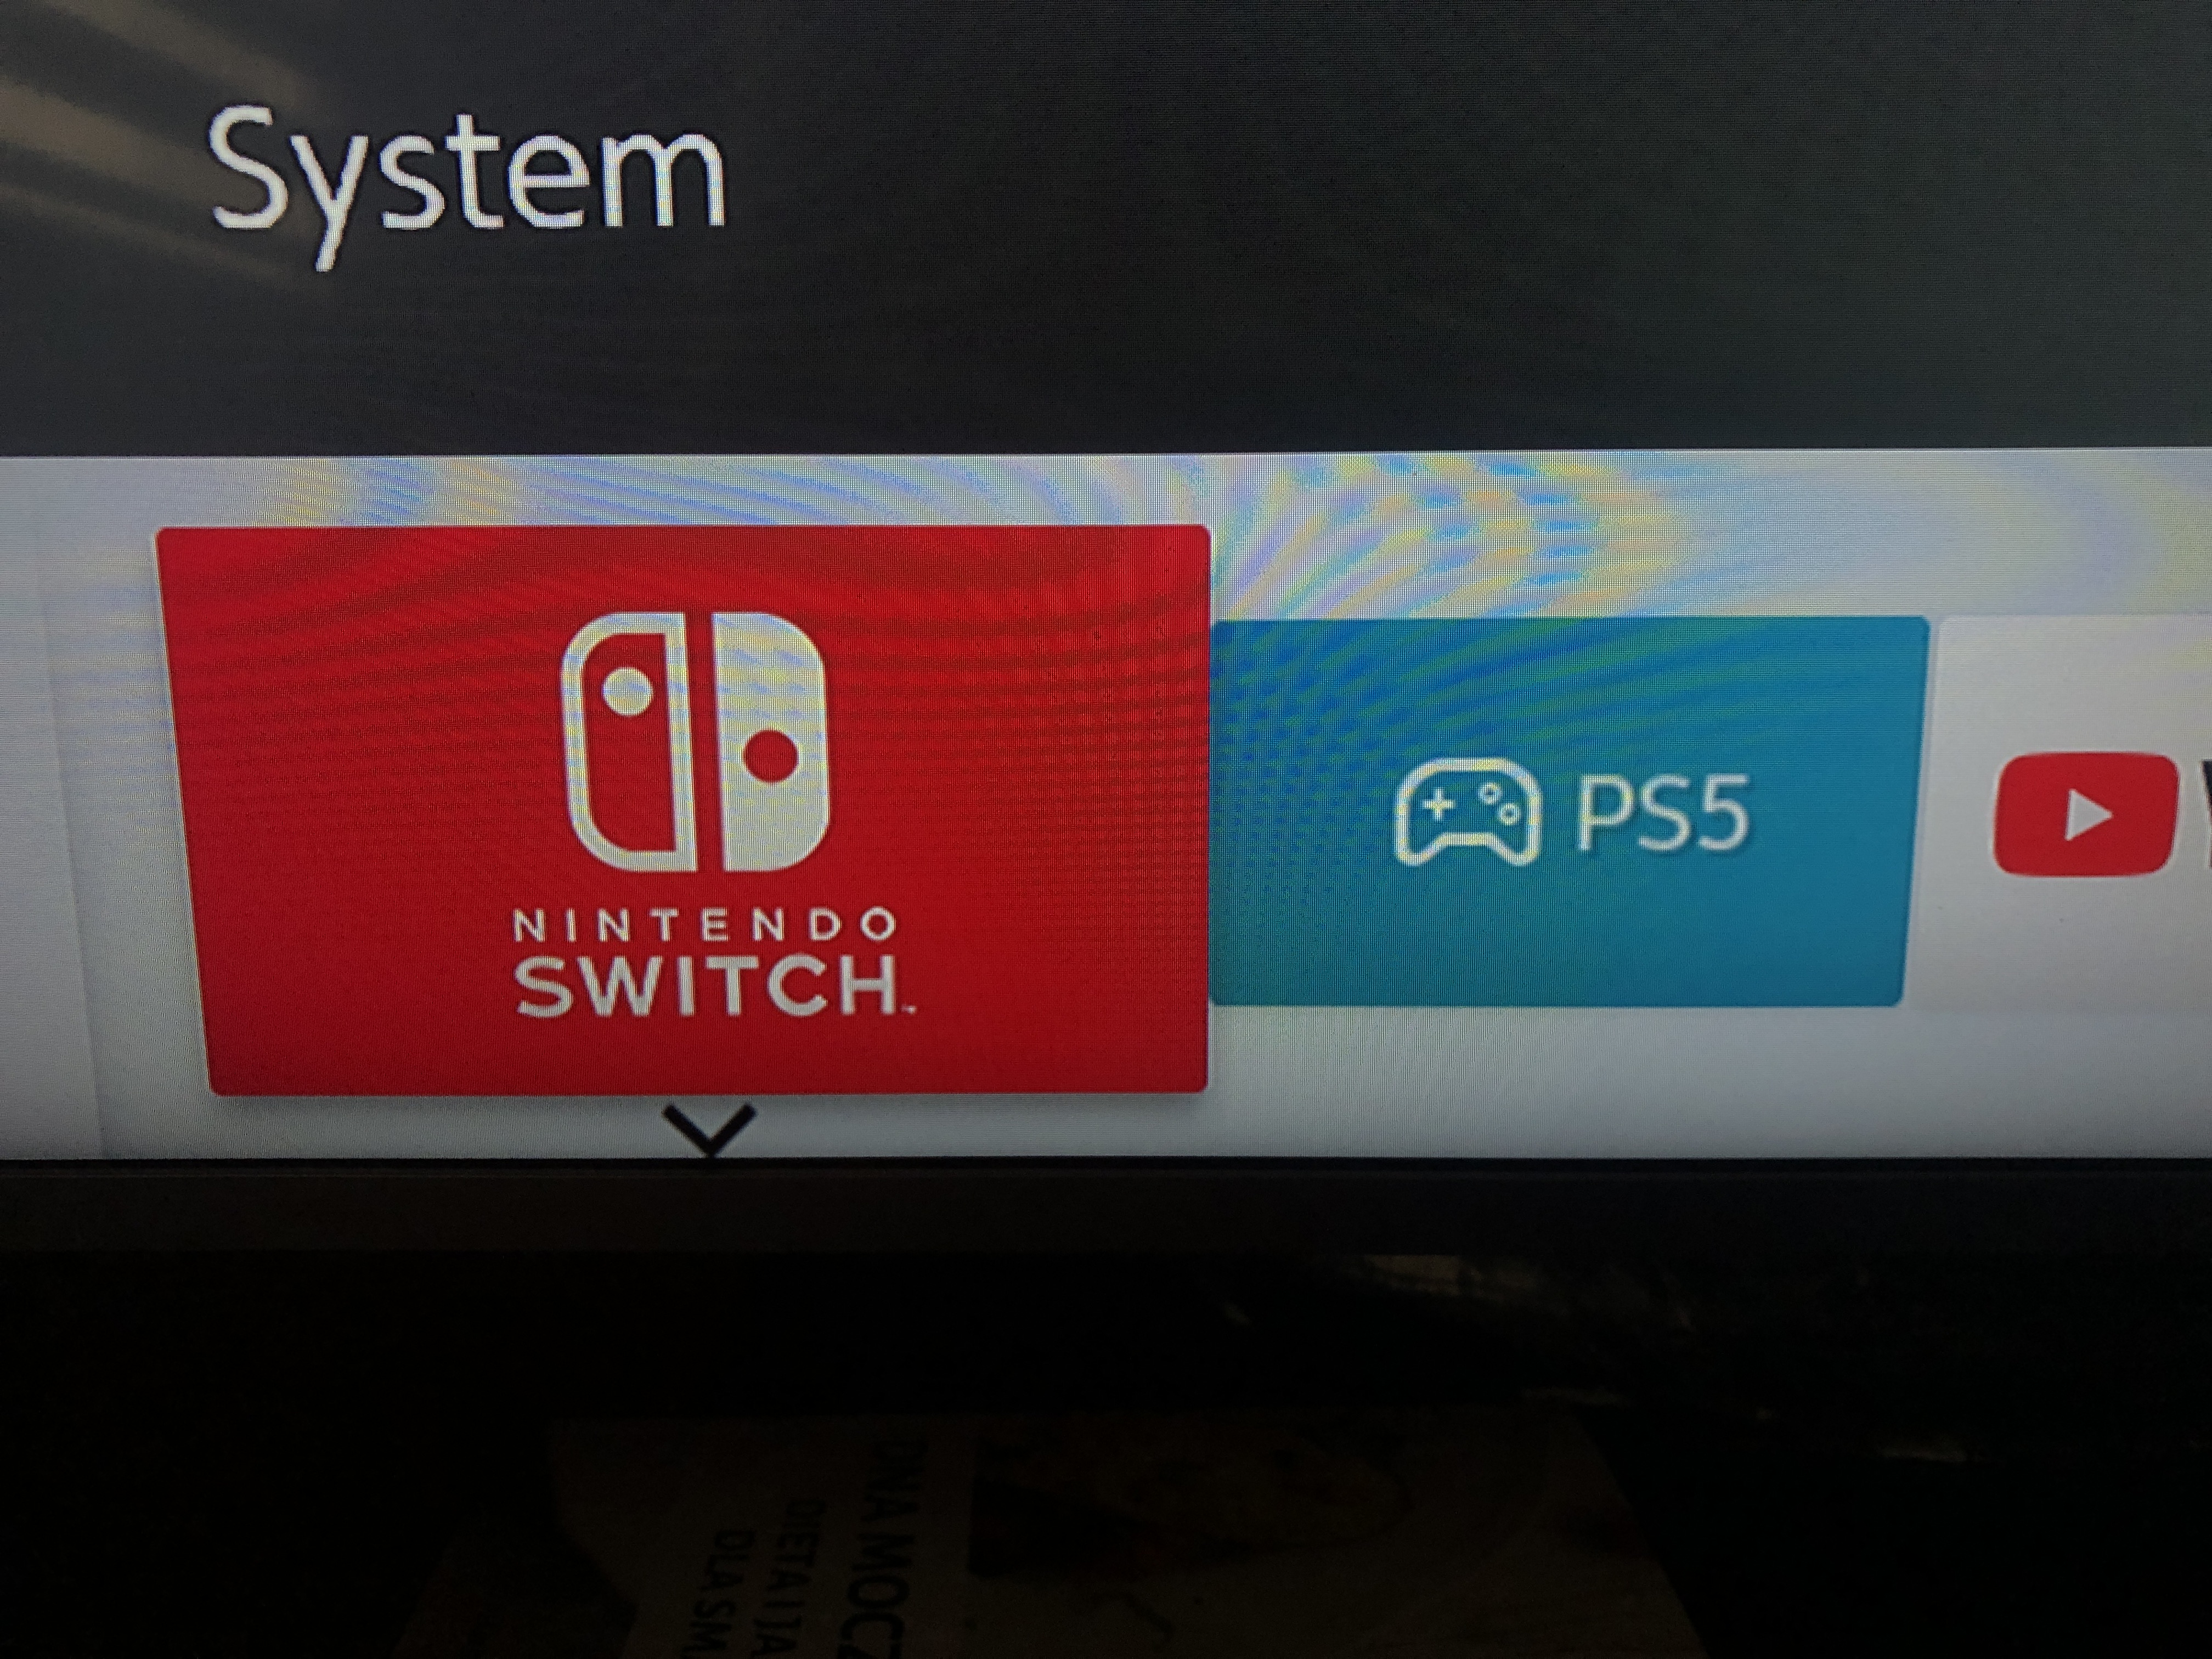 Solved: Q60R QLED (55 inch) flicker with Nintendo Switch - Samsung Community